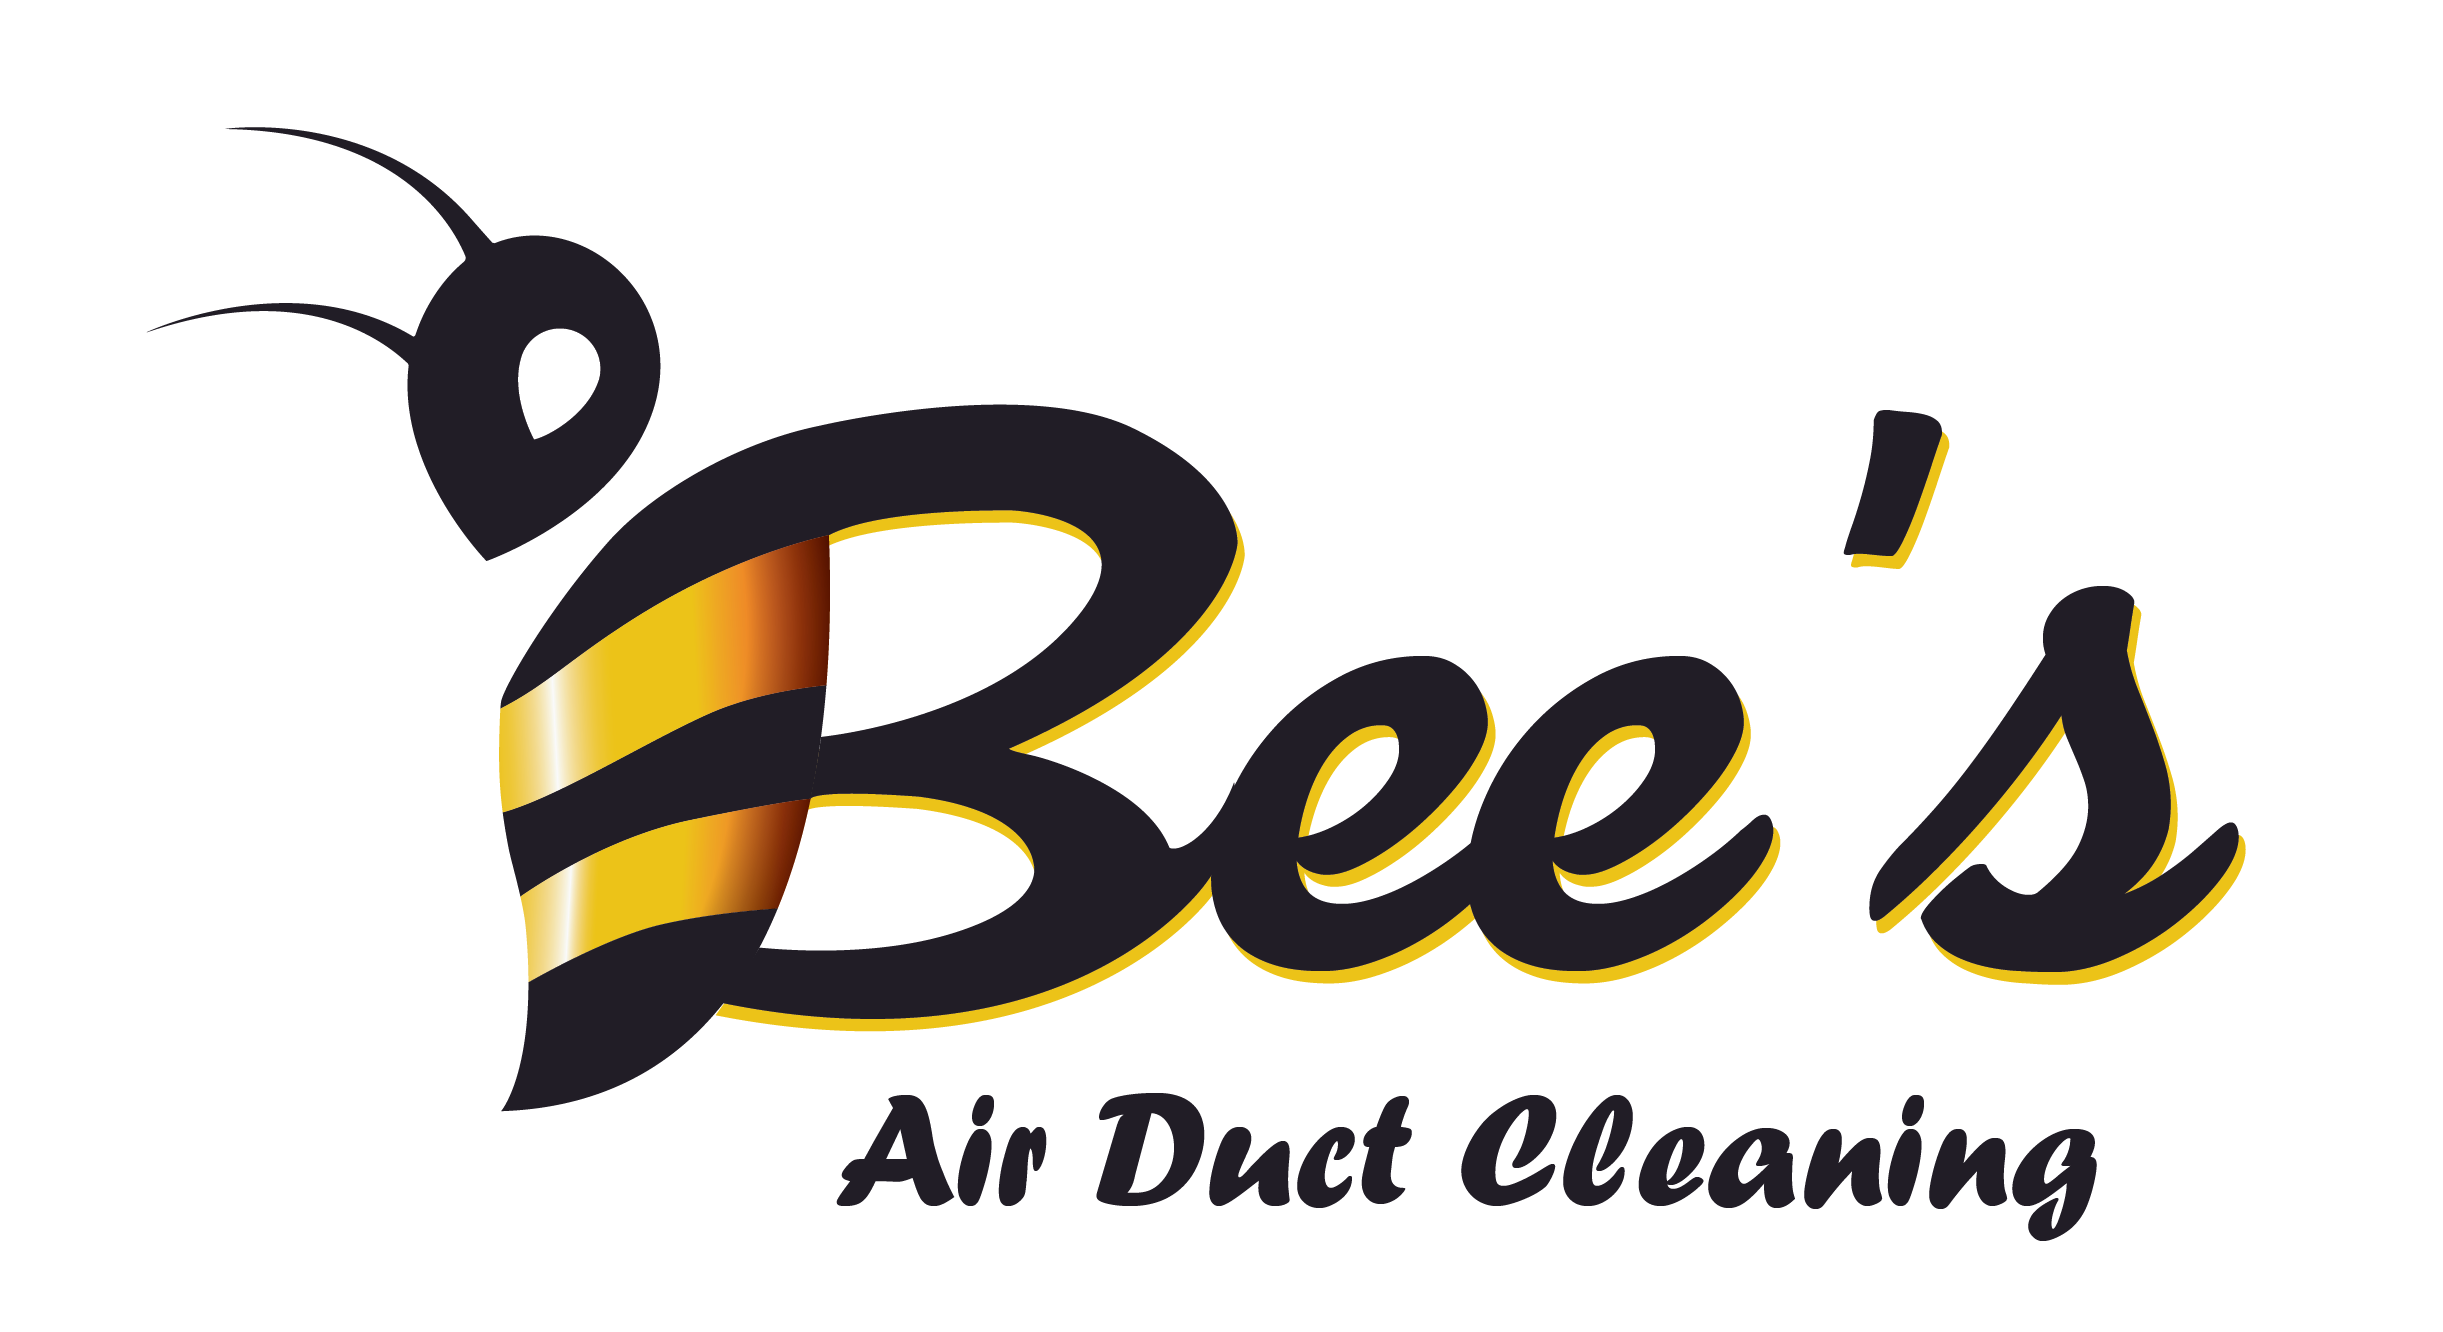 Breathe Easier with Bee's Air Duct Cleaning Services in Longmont CO. Picture of Bee's logo.